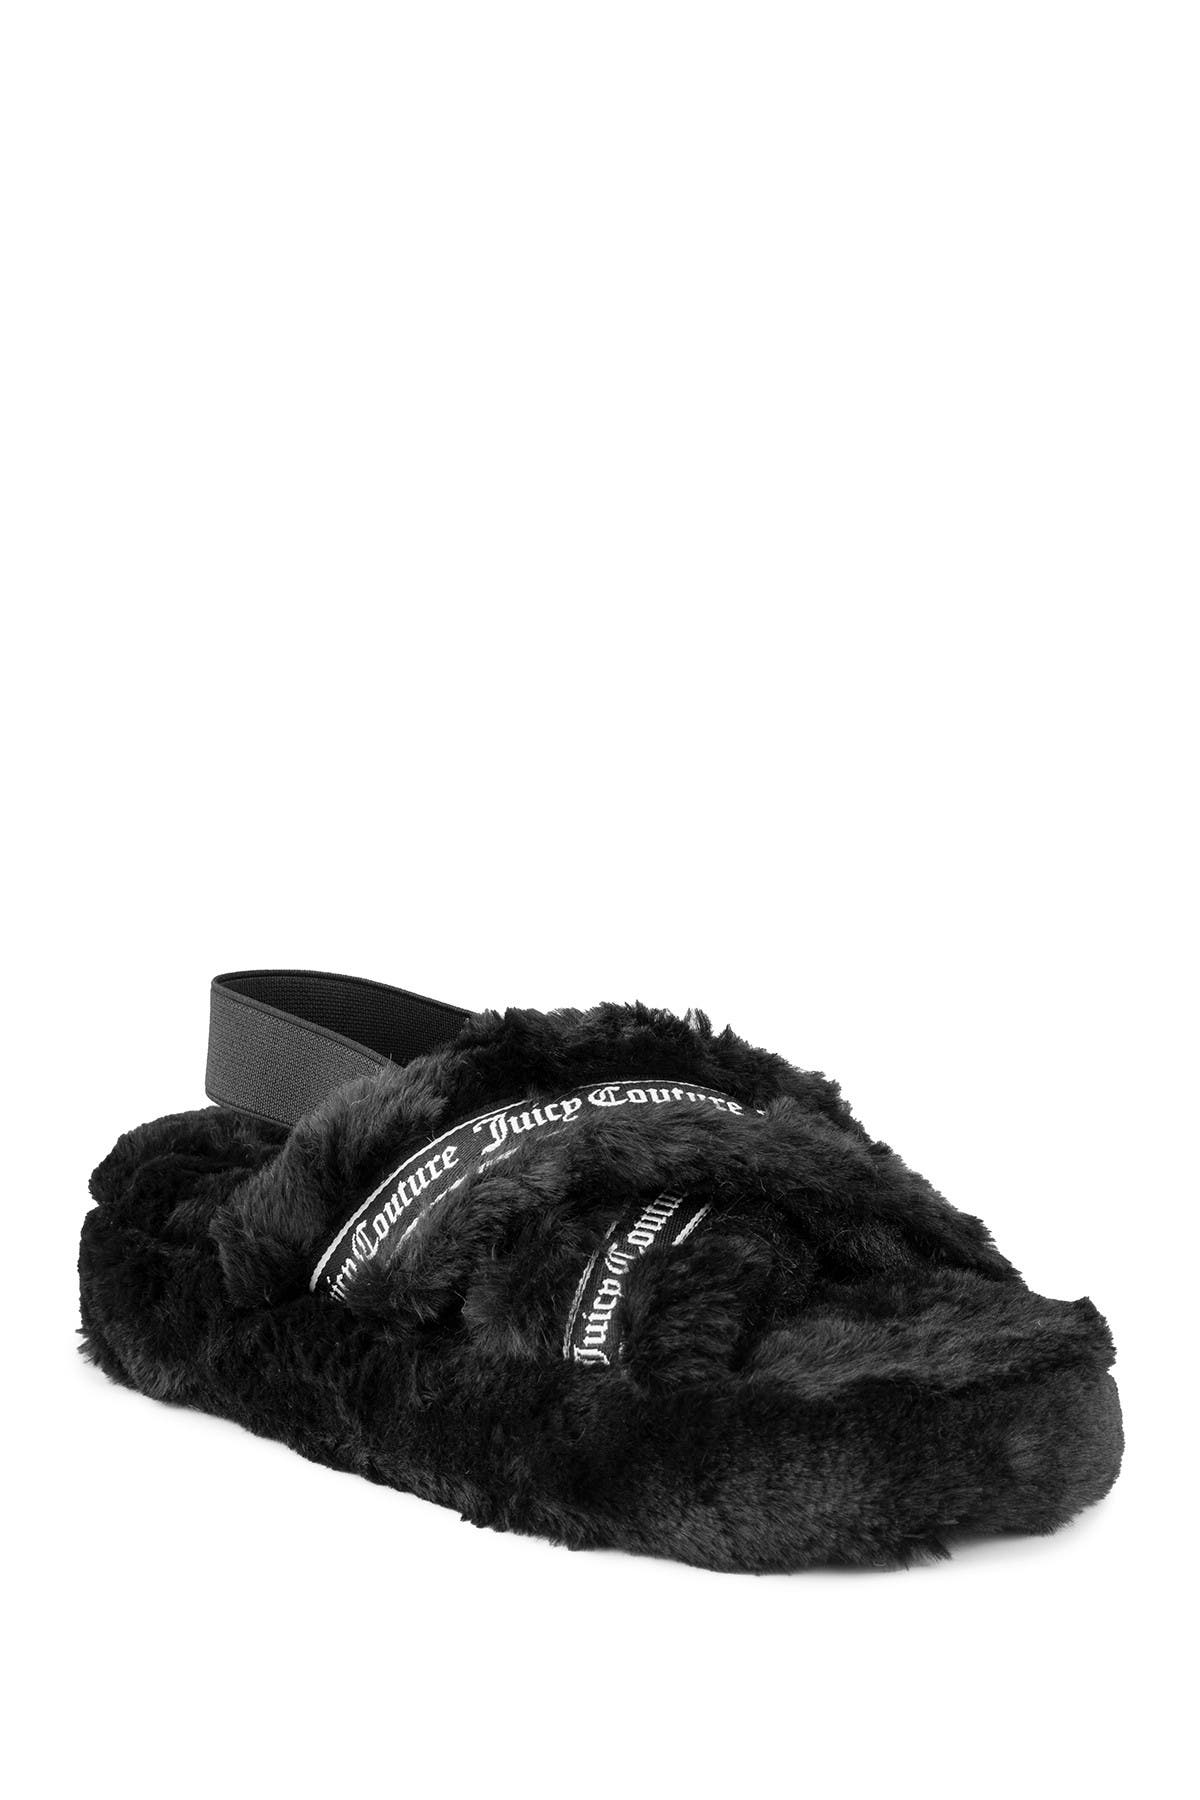 juicy couture slippers